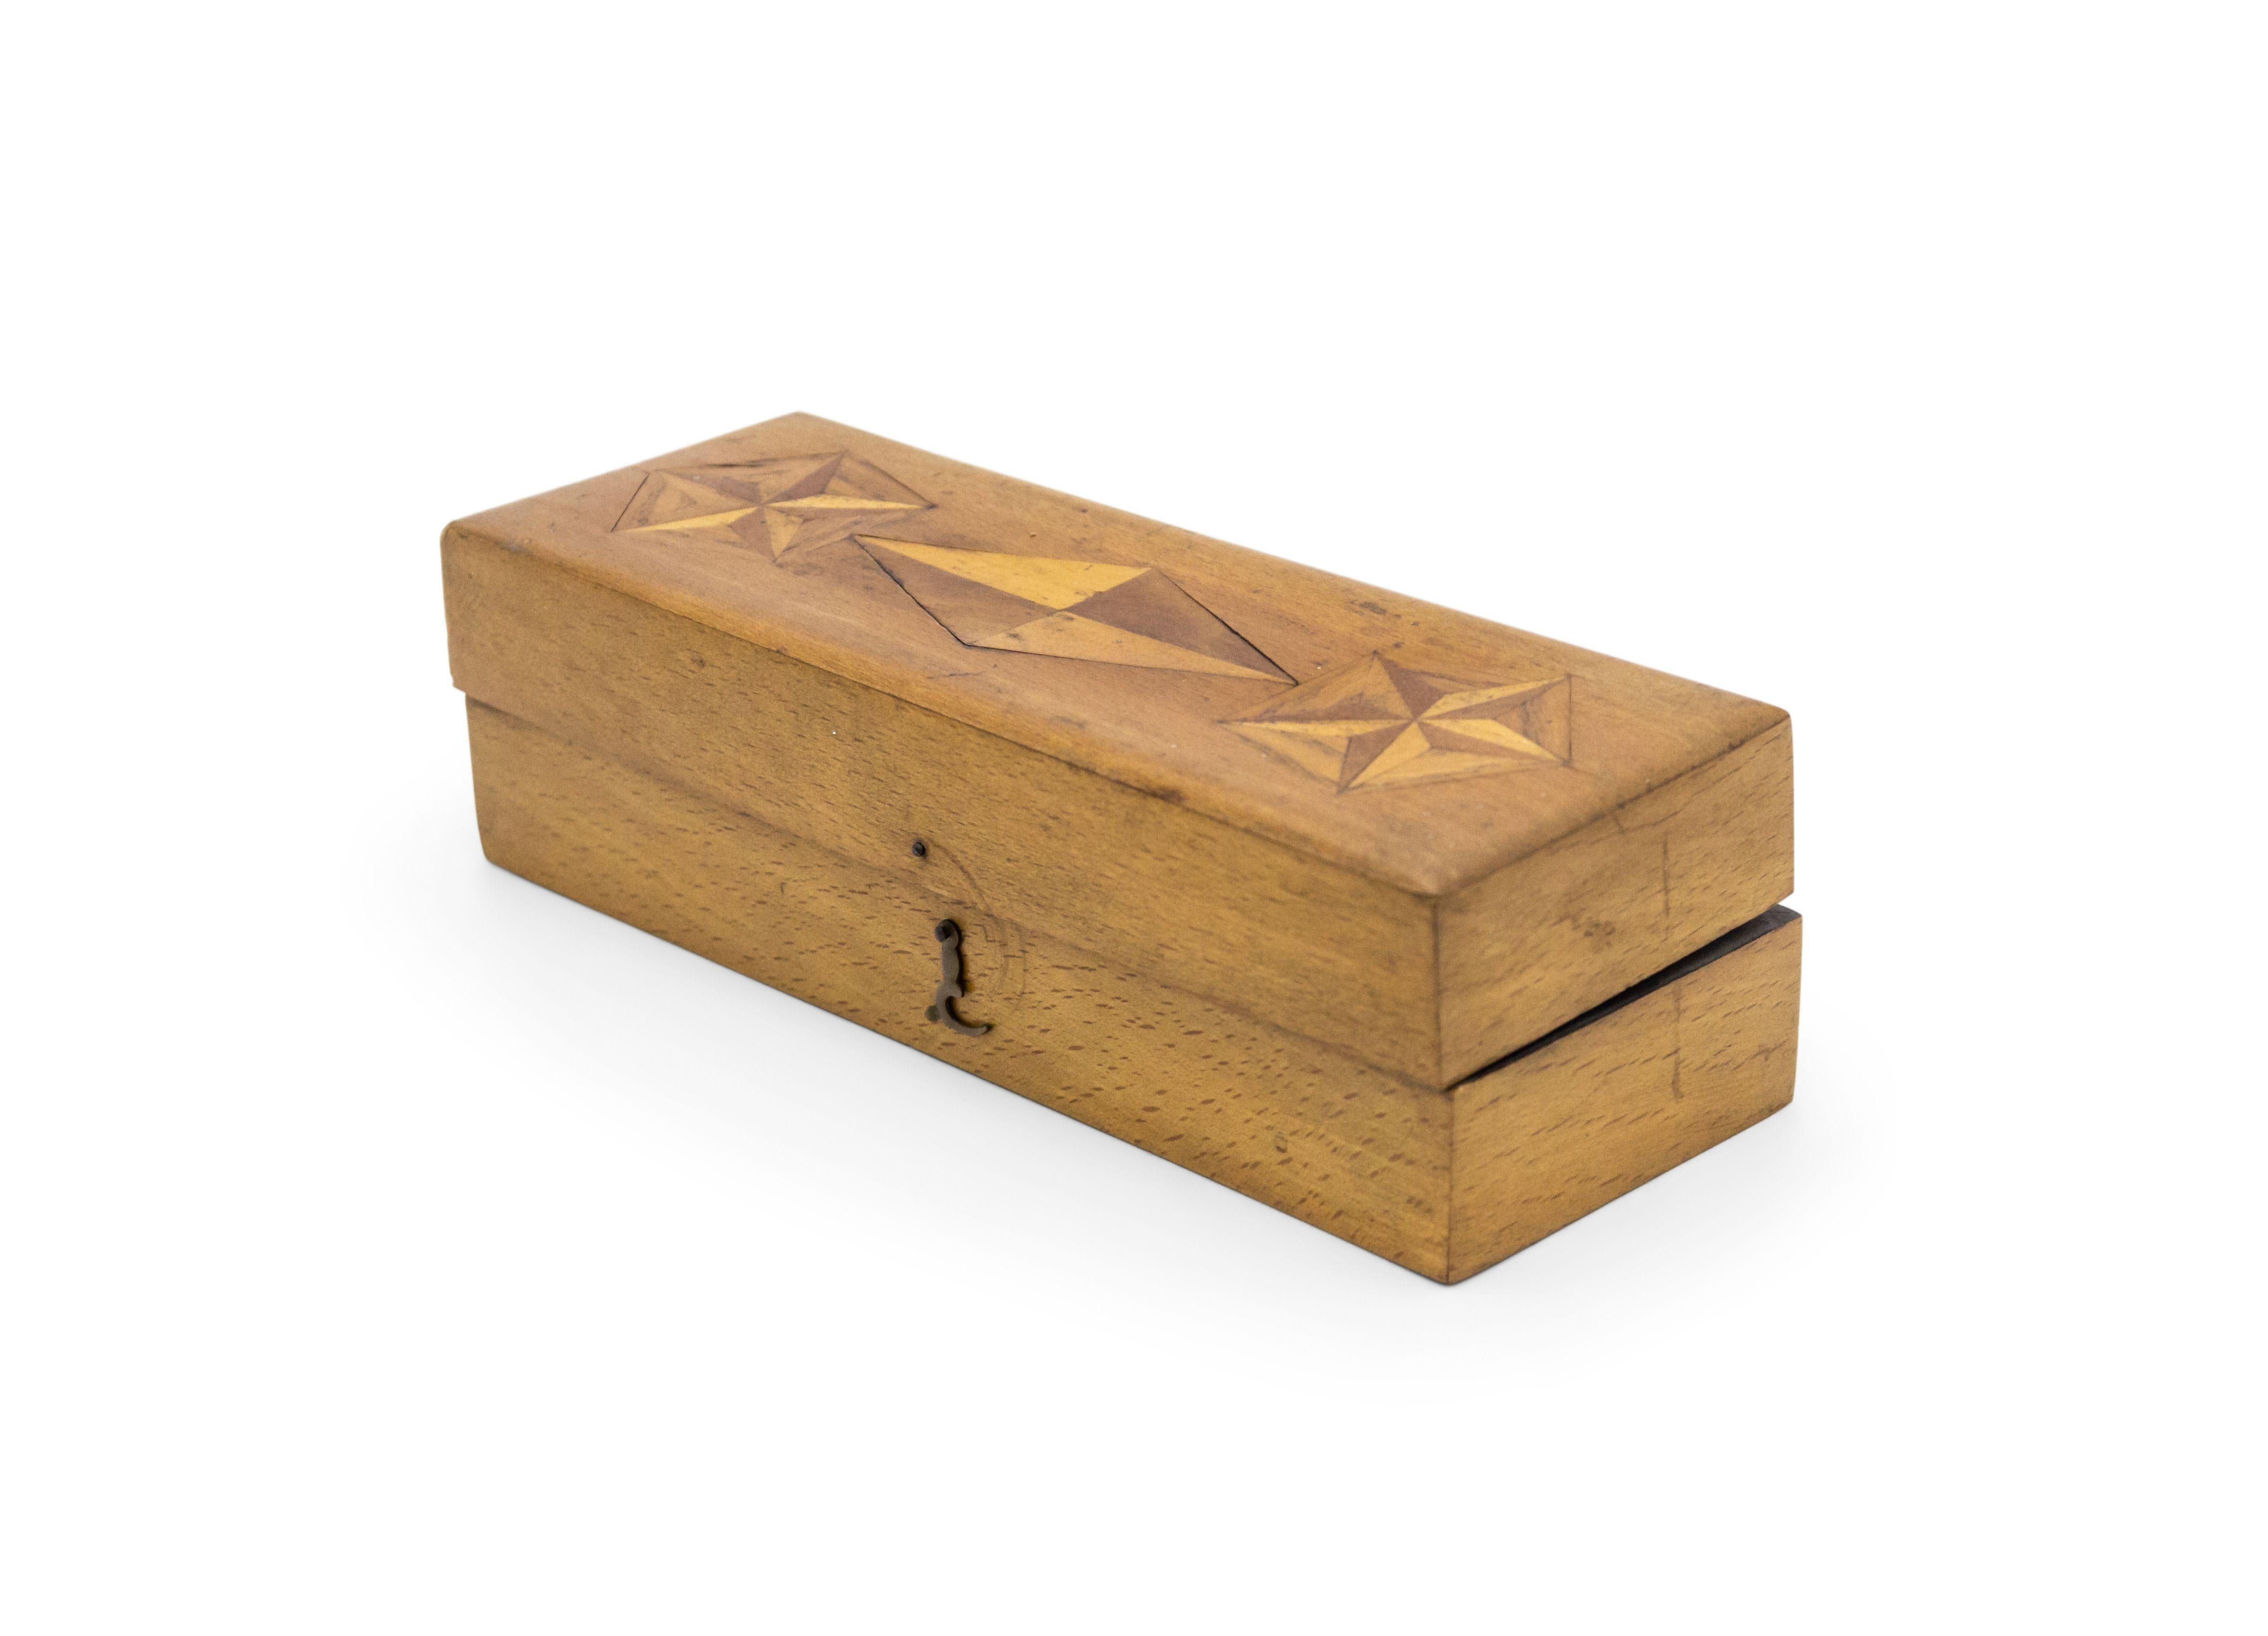 English Victorian-style rectangular light wood box with star and diamond shape inlays, with 3 compartments.
 